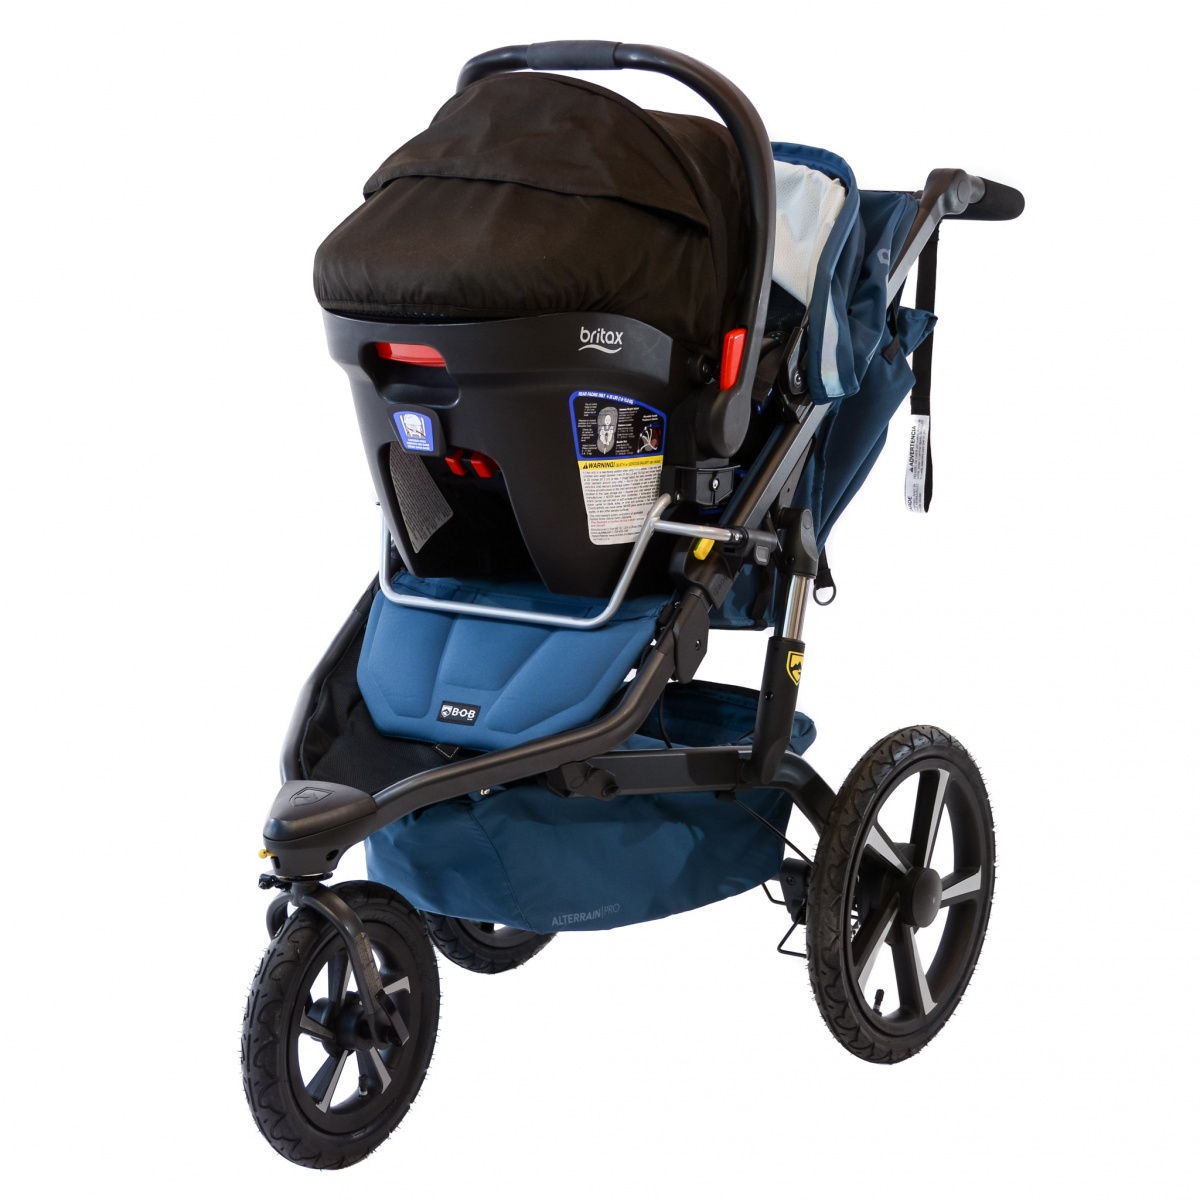 bob alterrain pro combo stroller and car seat combo review